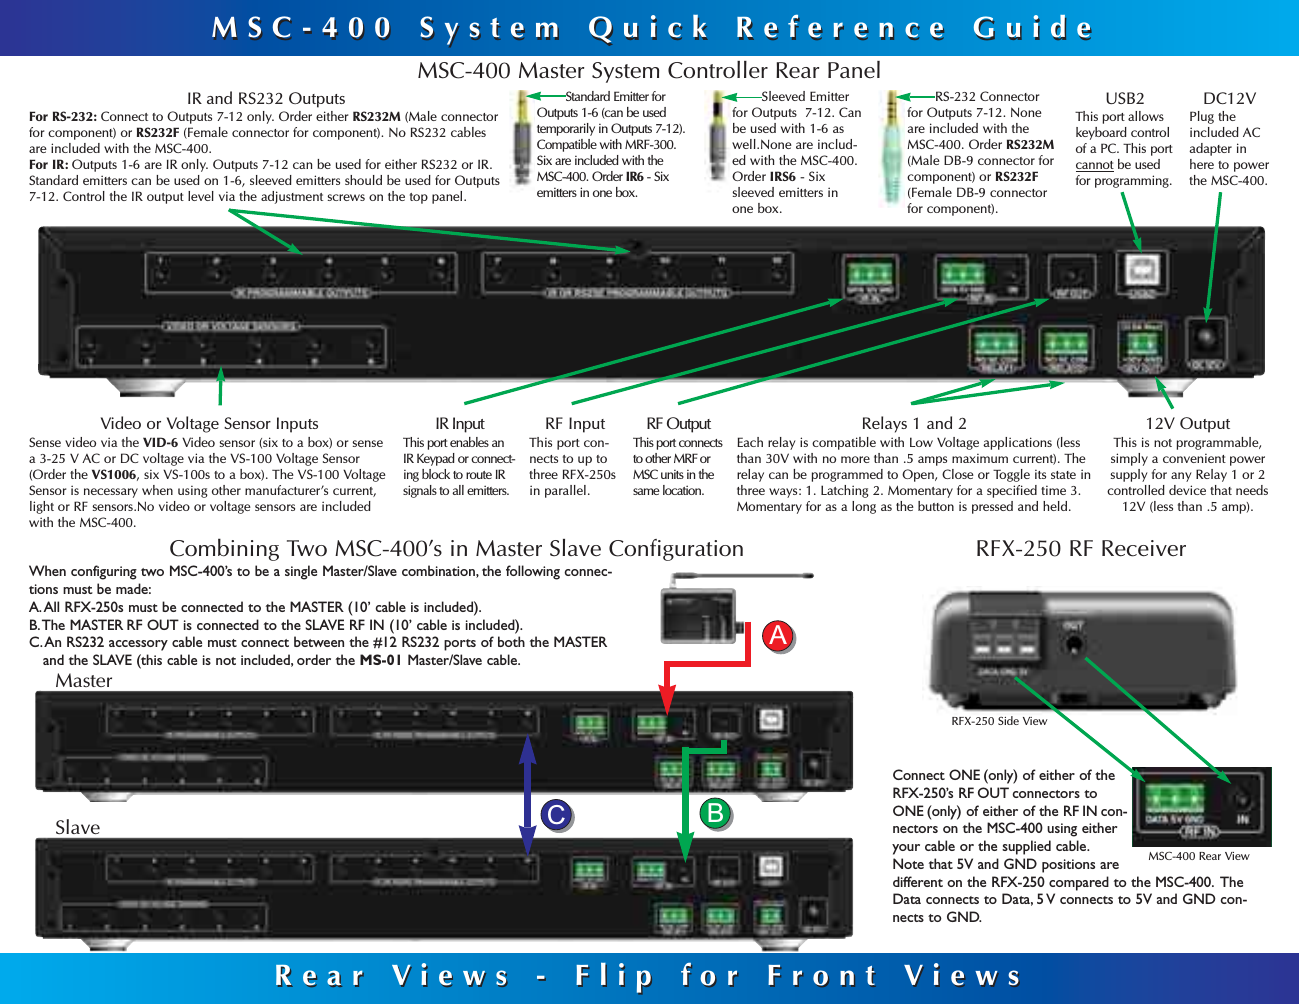 MSC-400 System Quick Reference GuideMSC-400 System Quick Reference GuideRear Views - Flip for Front ViewsRear Views - Flip for Front ViewsConnect ONE (only) of either of theRFX-250’s RF OUT connectors toONE (only) of either of the RF IN con-nectors on the MSC-400 using eitheryour cable or the supplied cable.Note that 5V and GND positions aredifferent on the RFX-250 compared to the MSC-400. TheData connects to Data, 5 V connects to 5V and GND con-nects to GND.USB2This port allowskeyboard controlof a PC. This portcannot be usedfor programming. DC12VPlug theincluded ACadapter inhere to powerthe MSC-400.IR InputThis port enables anIR Keypad or connect-ing block to route IRsignals to all emitters.RF InputThis port con-nects to up tothree RFX-250sin parallel.RF OutputThis port connectsto other MRF orMSC units in thesame location.IR and RS232 Outputs For RS-232: Connect to Outputs 7-12 only. Order either RS232M (Male connectorfor component) or RS232F (Female connector for component). No RS232 cablesare included with the MSC-400.For IR: Outputs 1-6 are IR only. Outputs 7-12 can be used for either RS232 or IR.Standard emitters can be used on 1-6, sleeved emitters should be used for Outputs7-12. Control the IR output level via the adjustment screws on the top panel.Video or Voltage Sensor InputsSense video via the VID-6 Video sensor (six to a box) or sensea 3-25 V AC or DC voltage via the VS-100 Voltage Sensor(Order the VS1006, six VS-100s to a box). The VS-100 VoltageSensor is necessary when using other manufacturer’s current,light or RF sensors.No video or voltage sensors are includedwith the MSC-400. Relays 1 and 2Each relay is compatible with Low Voltage applications (lessthan 30V with no more than .5 amps maximum current). Therelay can be programmed to Open, Close or Toggle its state inthree ways: 1. Latching 2. Momentary for a specified time 3.Momentary for as a long as the button is pressed and held.12V OutputThis is not programmable,simply a convenient powersupply for any Relay 1 or 2controlled device that needs12V (less than .5 amp). MSC-400 Master System Controller Rear PanelRFX-250 RF ReceiverRFX-250 Side ViewMSC-400 Rear ViewCombining Two MSC-400’s in Master Slave ConfigurationMasterSlaveWhen configuring two MSC-400’s to be a single Master/Slave combination, the following connec-tions must be made:A.All RFX-250s must be connected to the MASTER (10’ cable is included).B.The MASTER RF OUT is connected to the SLAVE RF IN (10’ cable is included).C. An RS232 accessory cable must connect between the #12 RS232 ports of both the MASTERand the SLAVE (this cable is not included, order the MS-01 Master/Slave cable.RS-232 Connectorfor Outputs 7-12. Noneare included with theMSC-400. Order RS232M(Male DB-9 connector forcomponent) or RS232F(Female DB-9 connectorfor component).Sleeved Emitterfor Outputs  7-12. Canbe used with 1-6 aswell.None are includ-ed with the MSC-400.Order IRS6 - Sixsleeved emitters inone box. Standard Emitter forOutputs 1-6 (can be usedtemporarily in Outputs 7-12).Compatible with MRF-300.Six are included with theMSC-400. Order IR6 - Sixemitters in one box.ABC